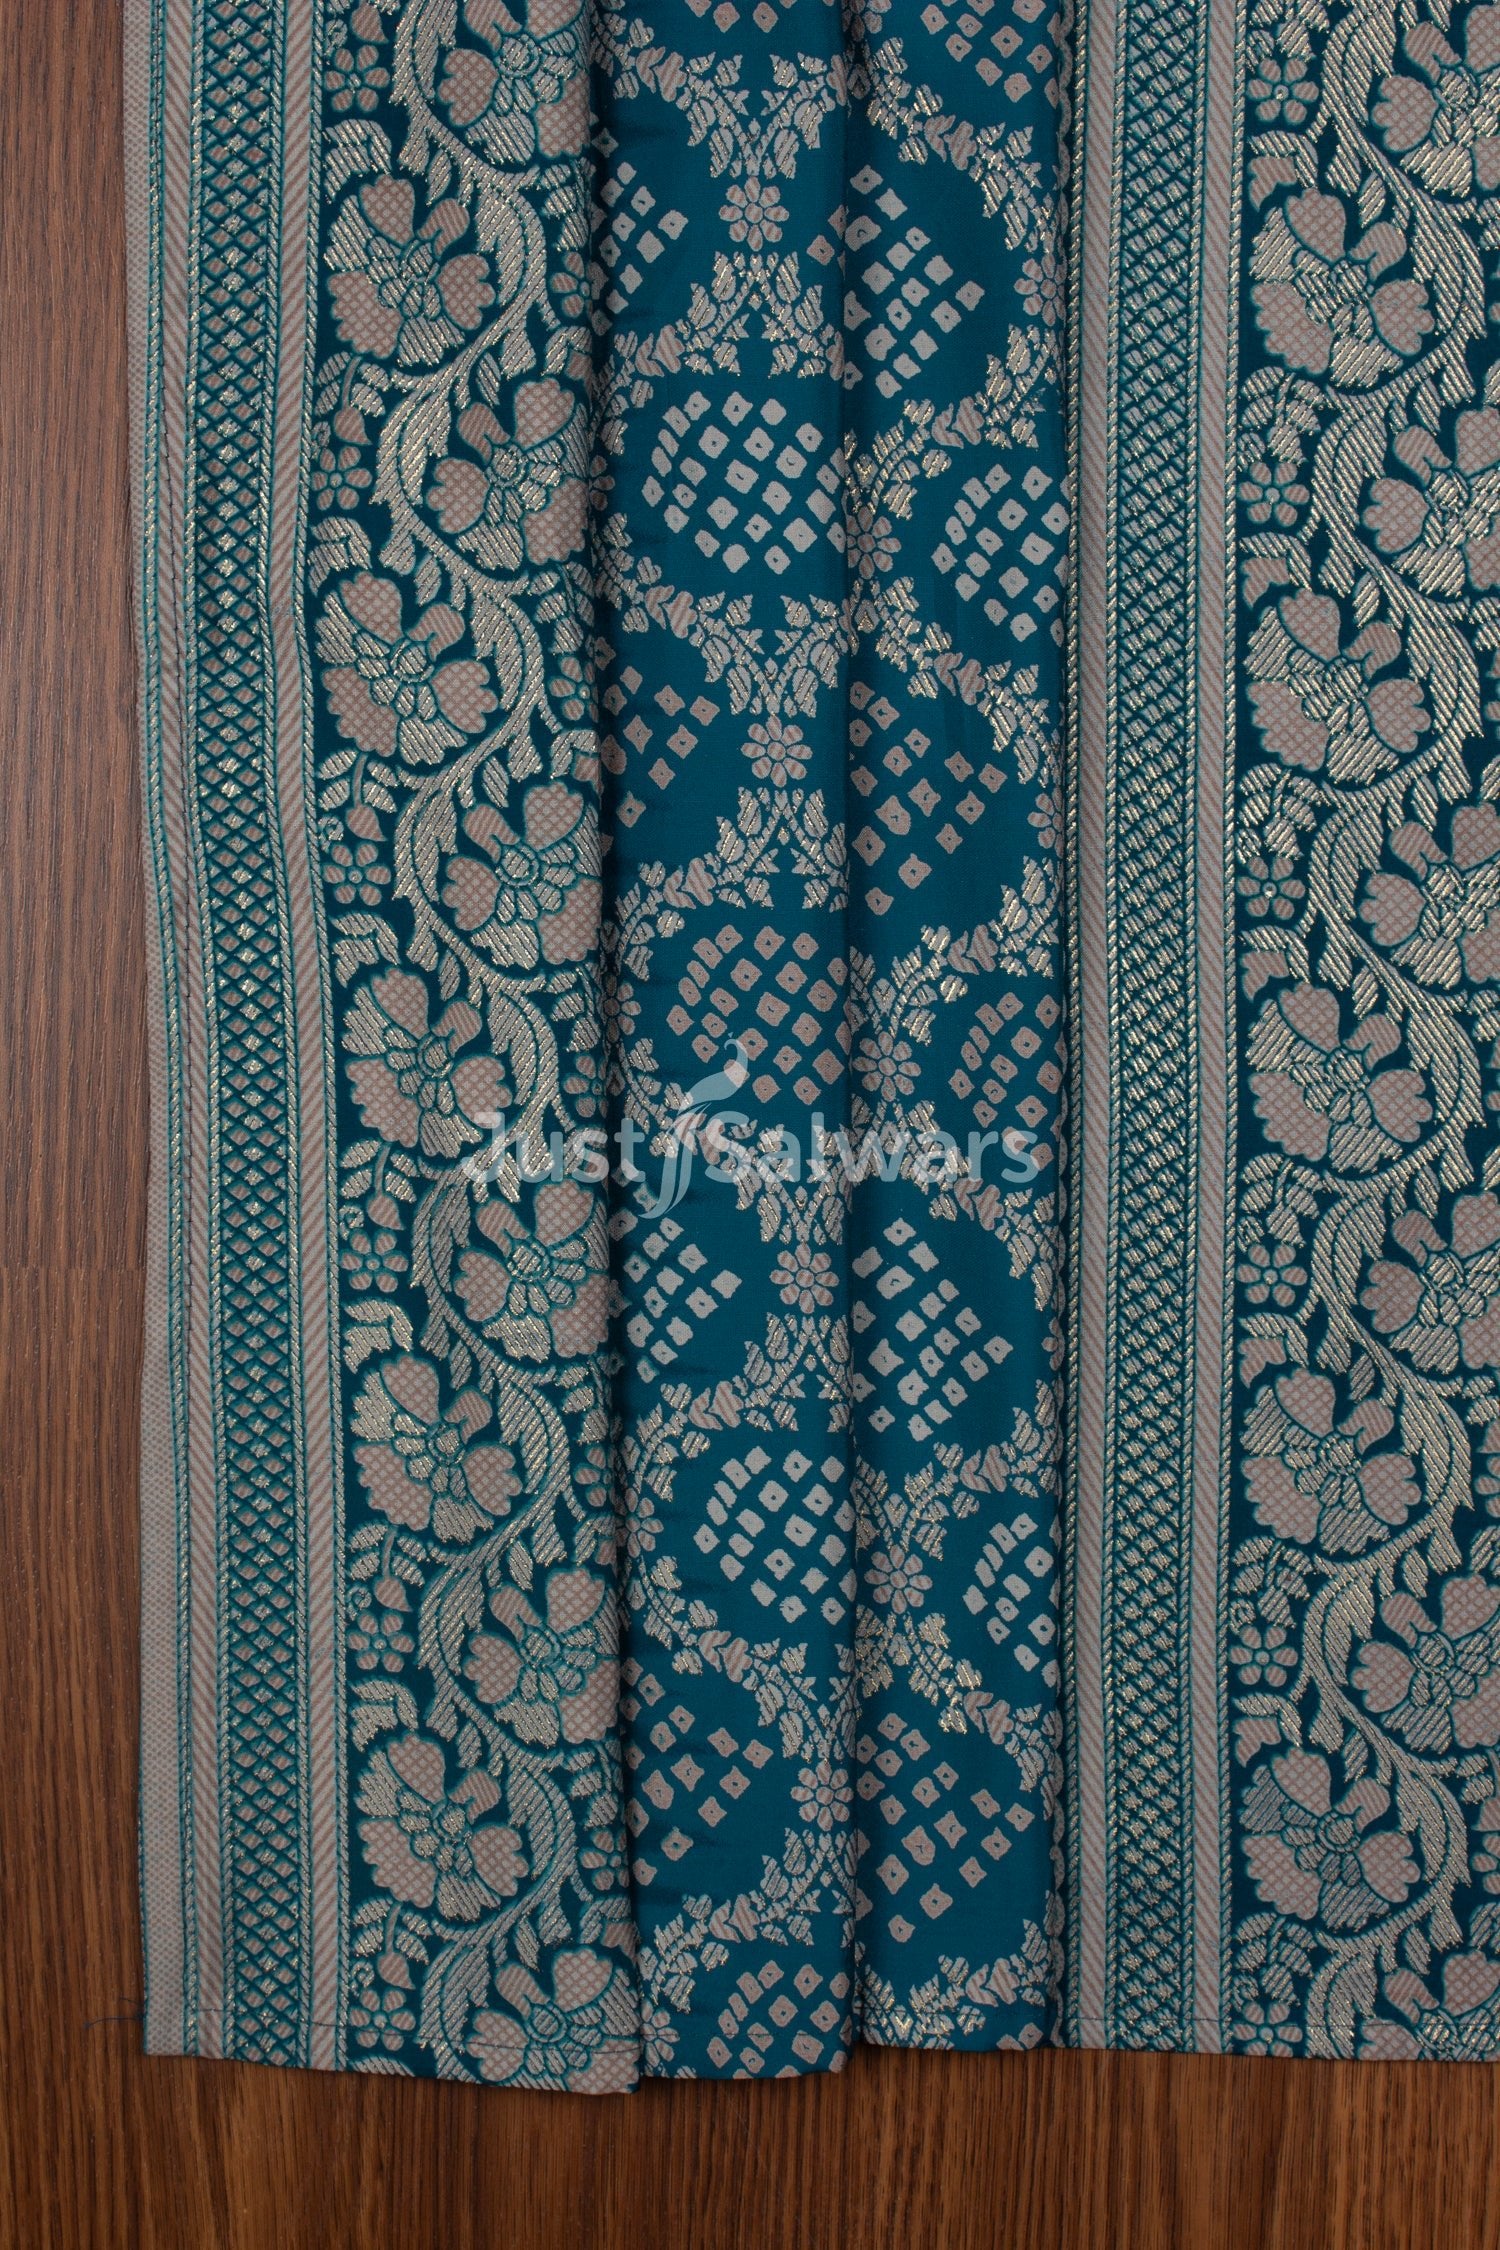 Rani Pink and Blue Colour Silk Cotton Dress Material -Dress Material- Just Salwars